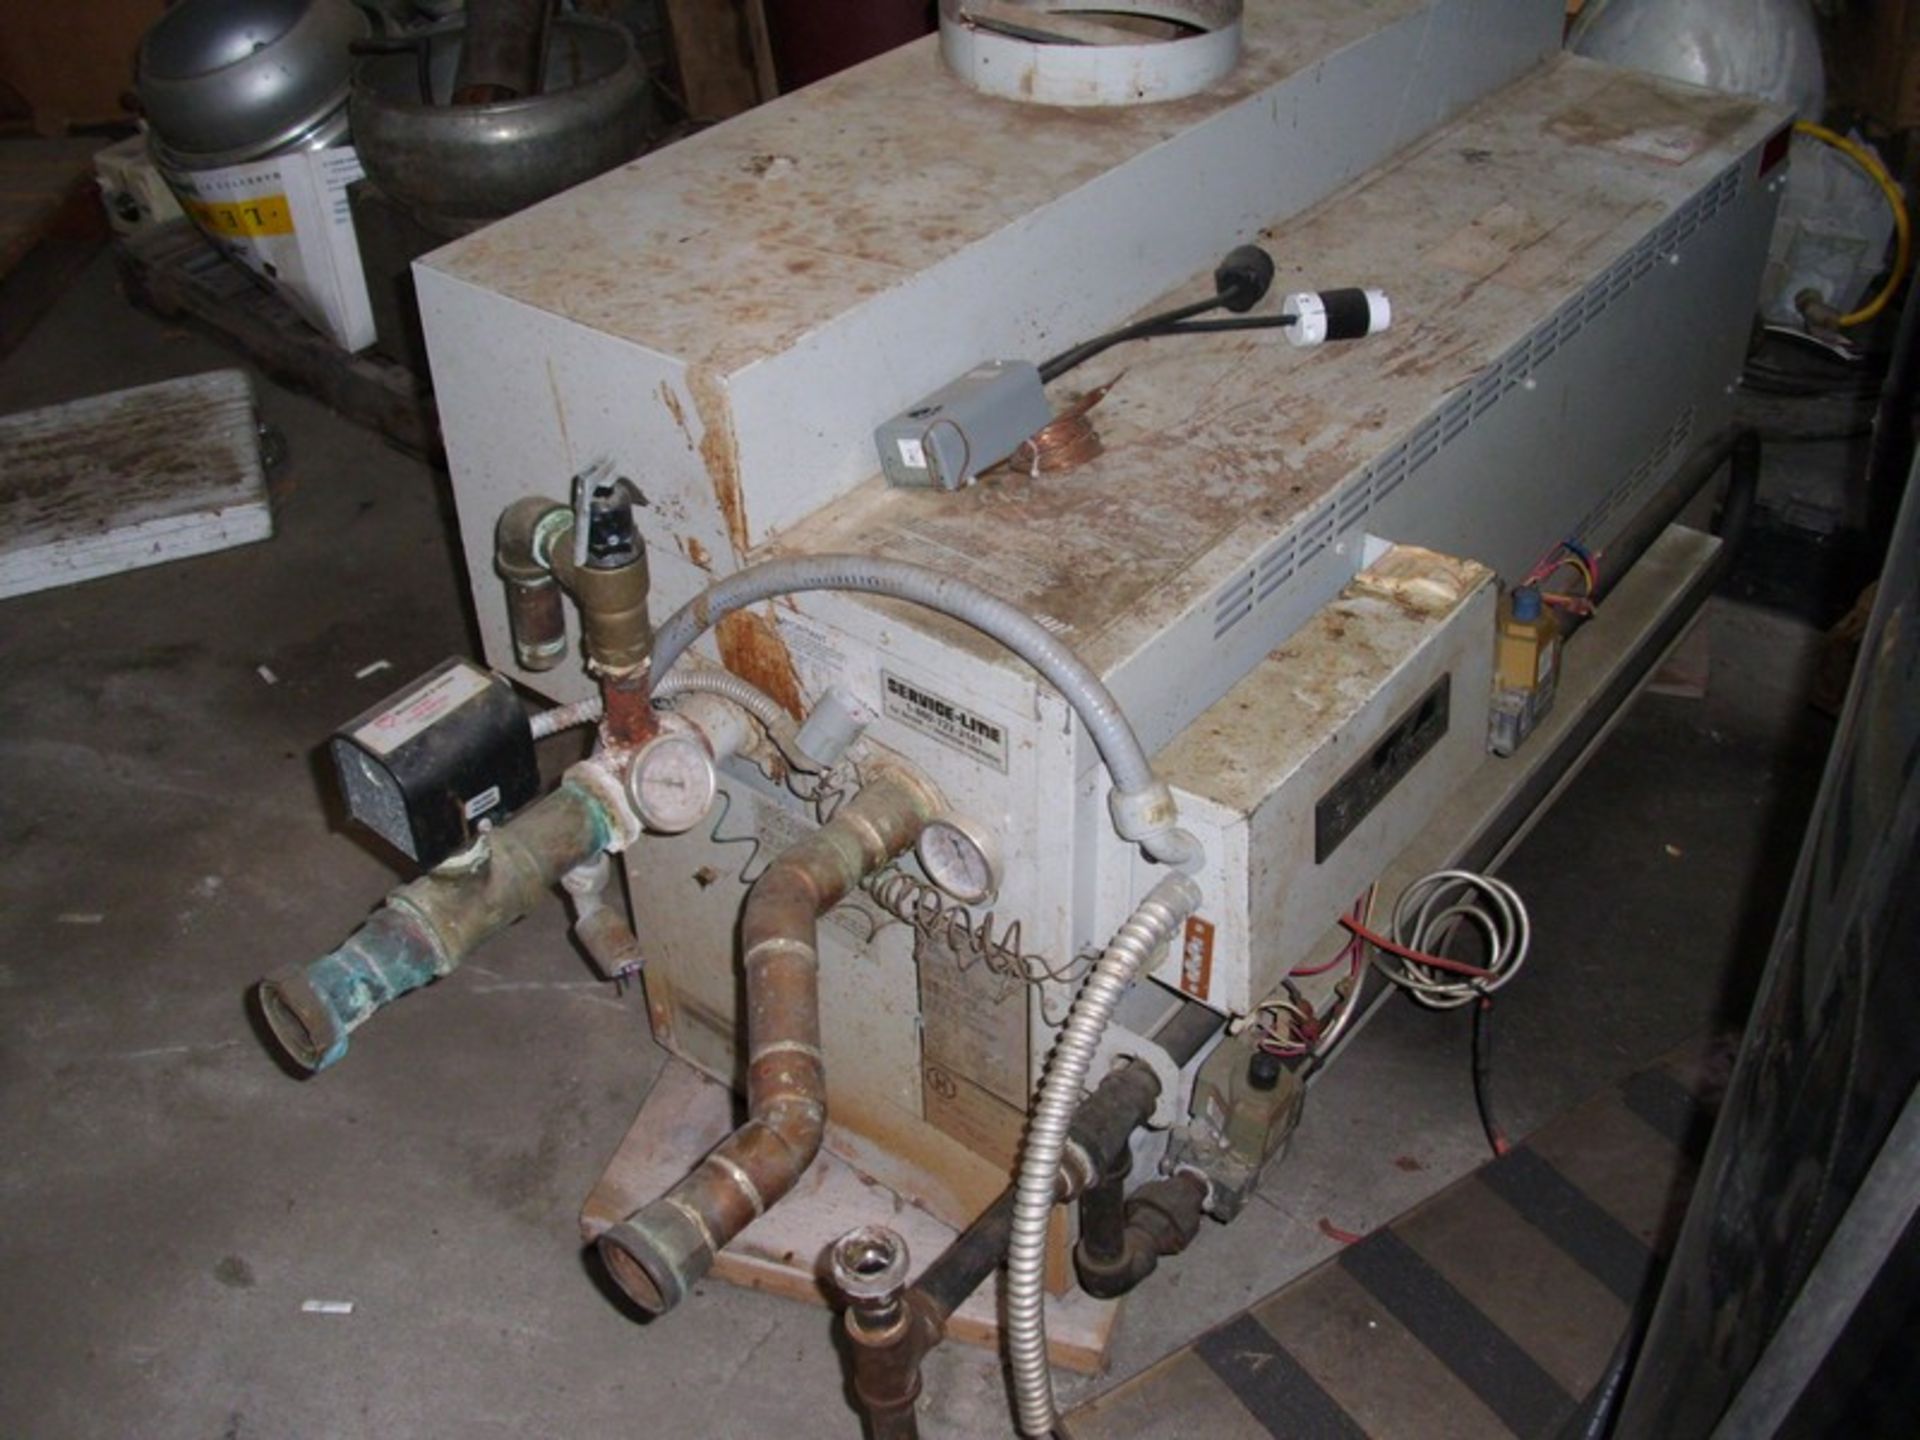 Lochinvar Hot Water Boiler; Model # RNN399PW; Natural Gas Fired: Estimated 6hp; 60”Long X 26” Wide X - Image 2 of 2